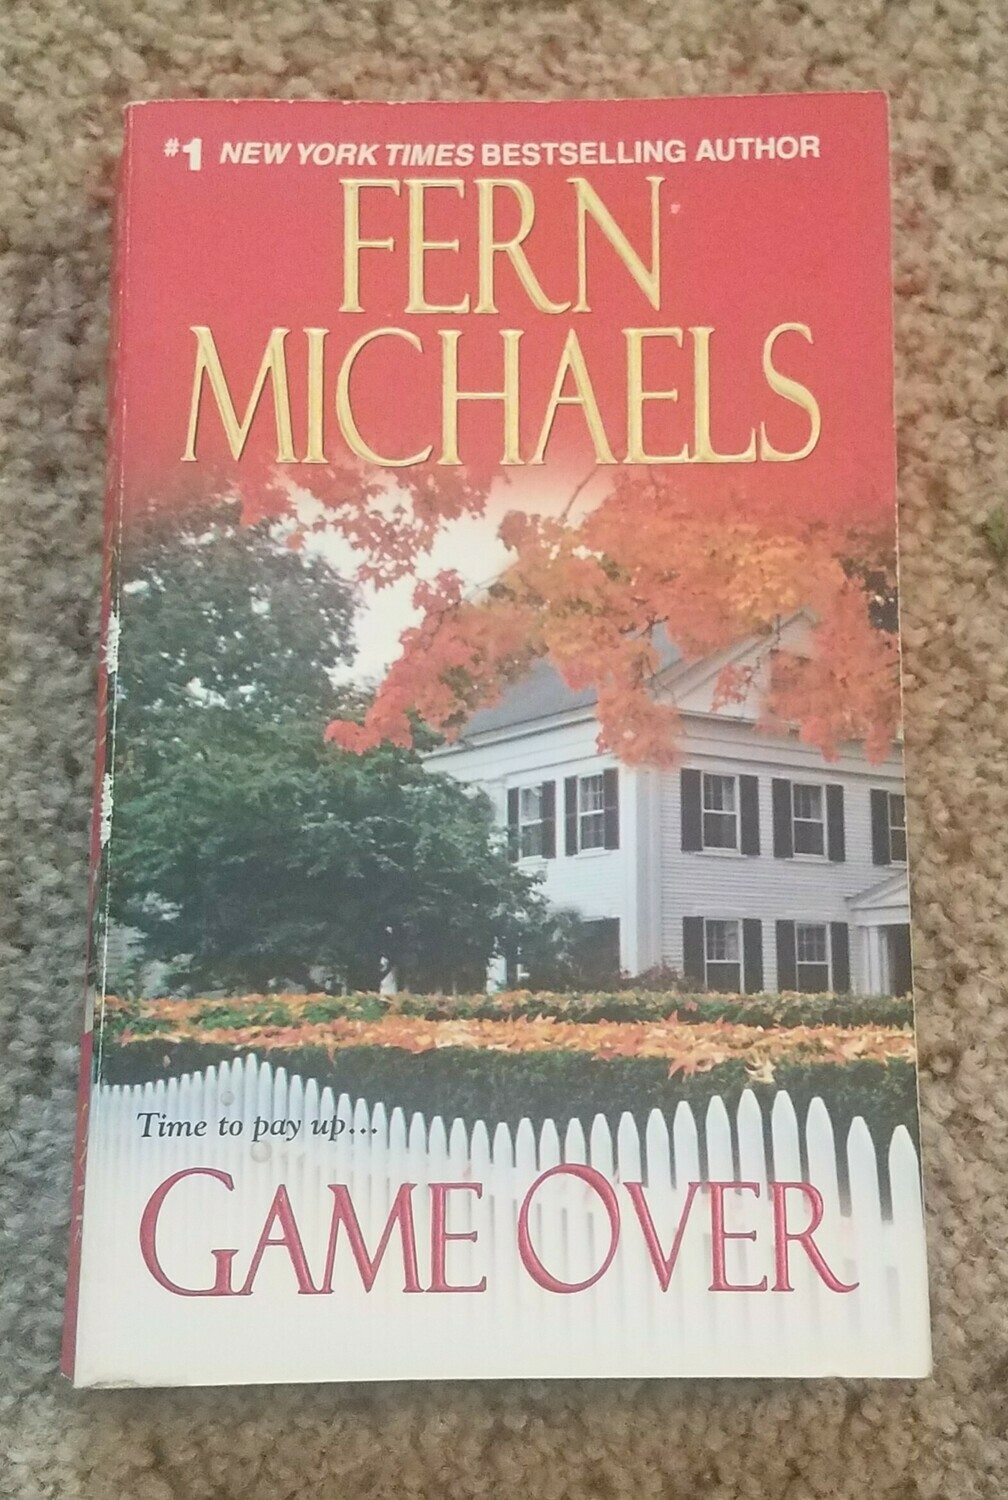 Game Over by Fern Michaels